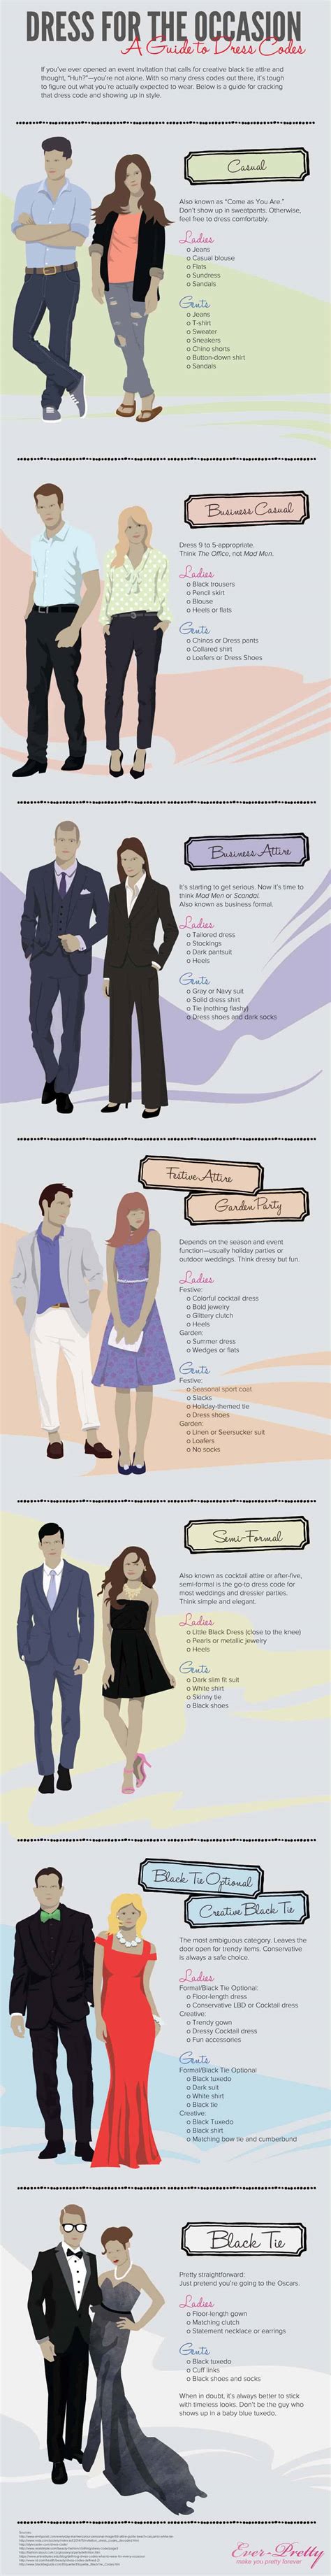 dress codes daily infographic